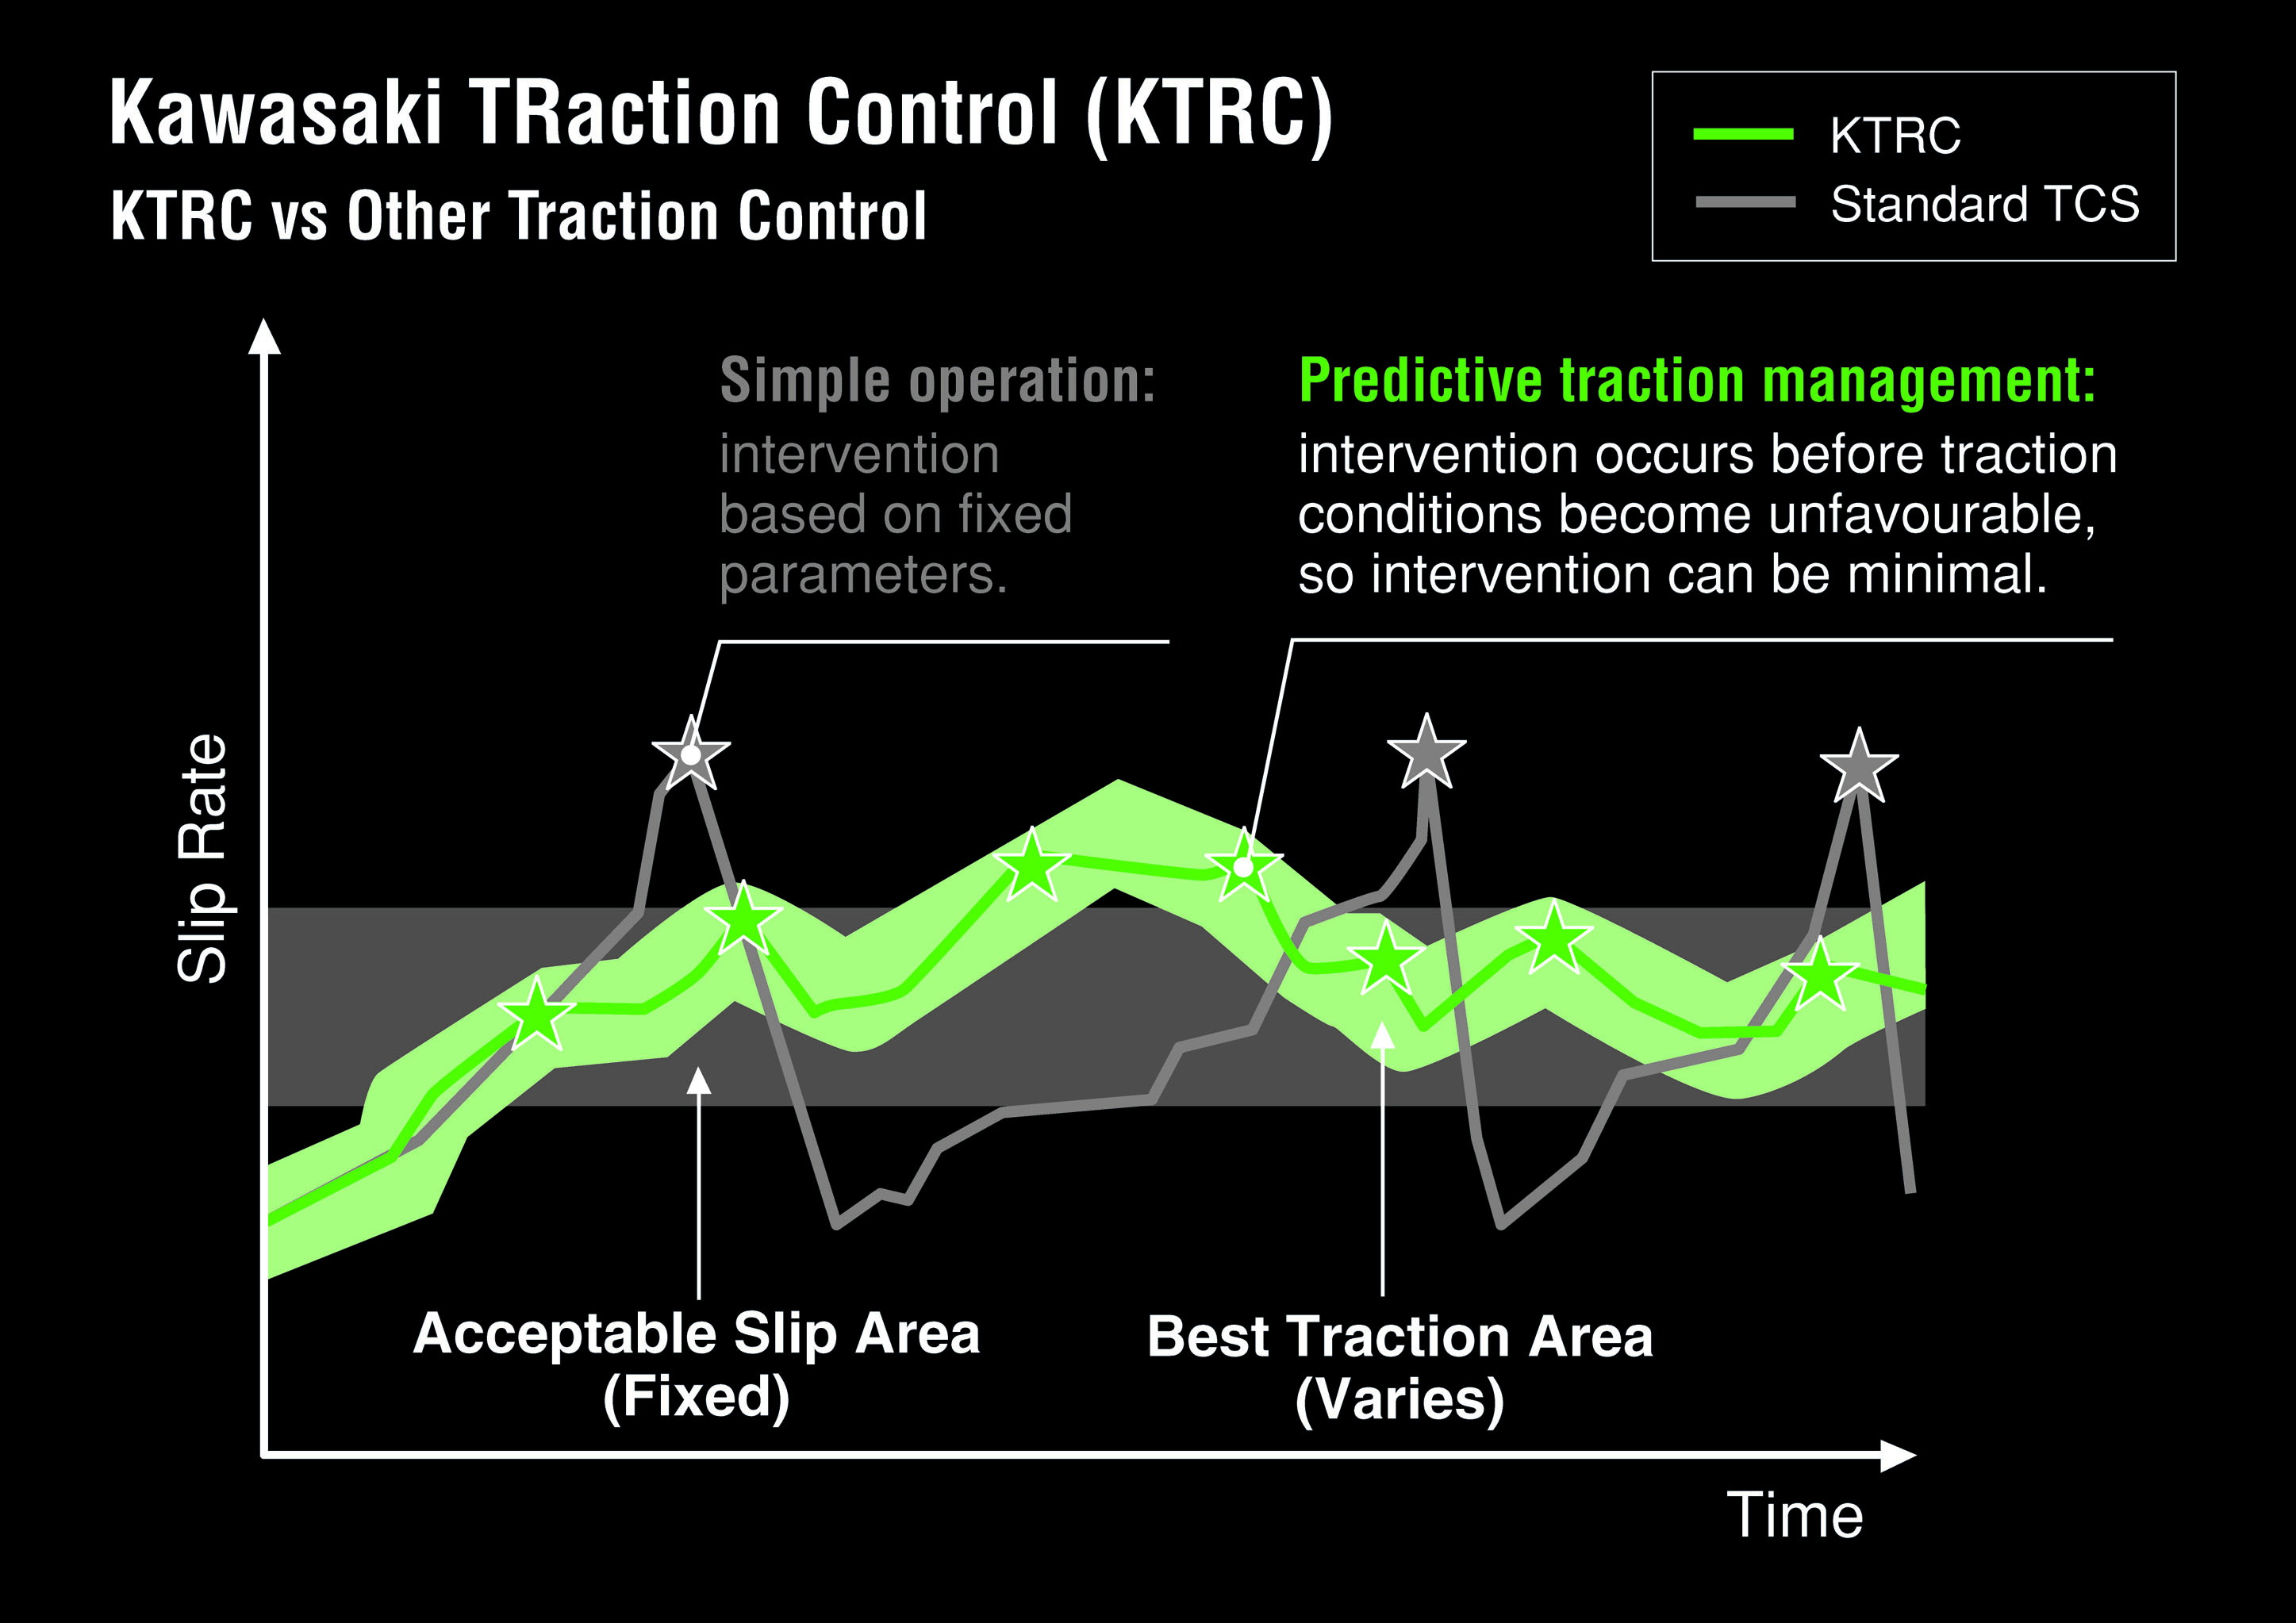 Kawasaki Traction Control vs other traction control